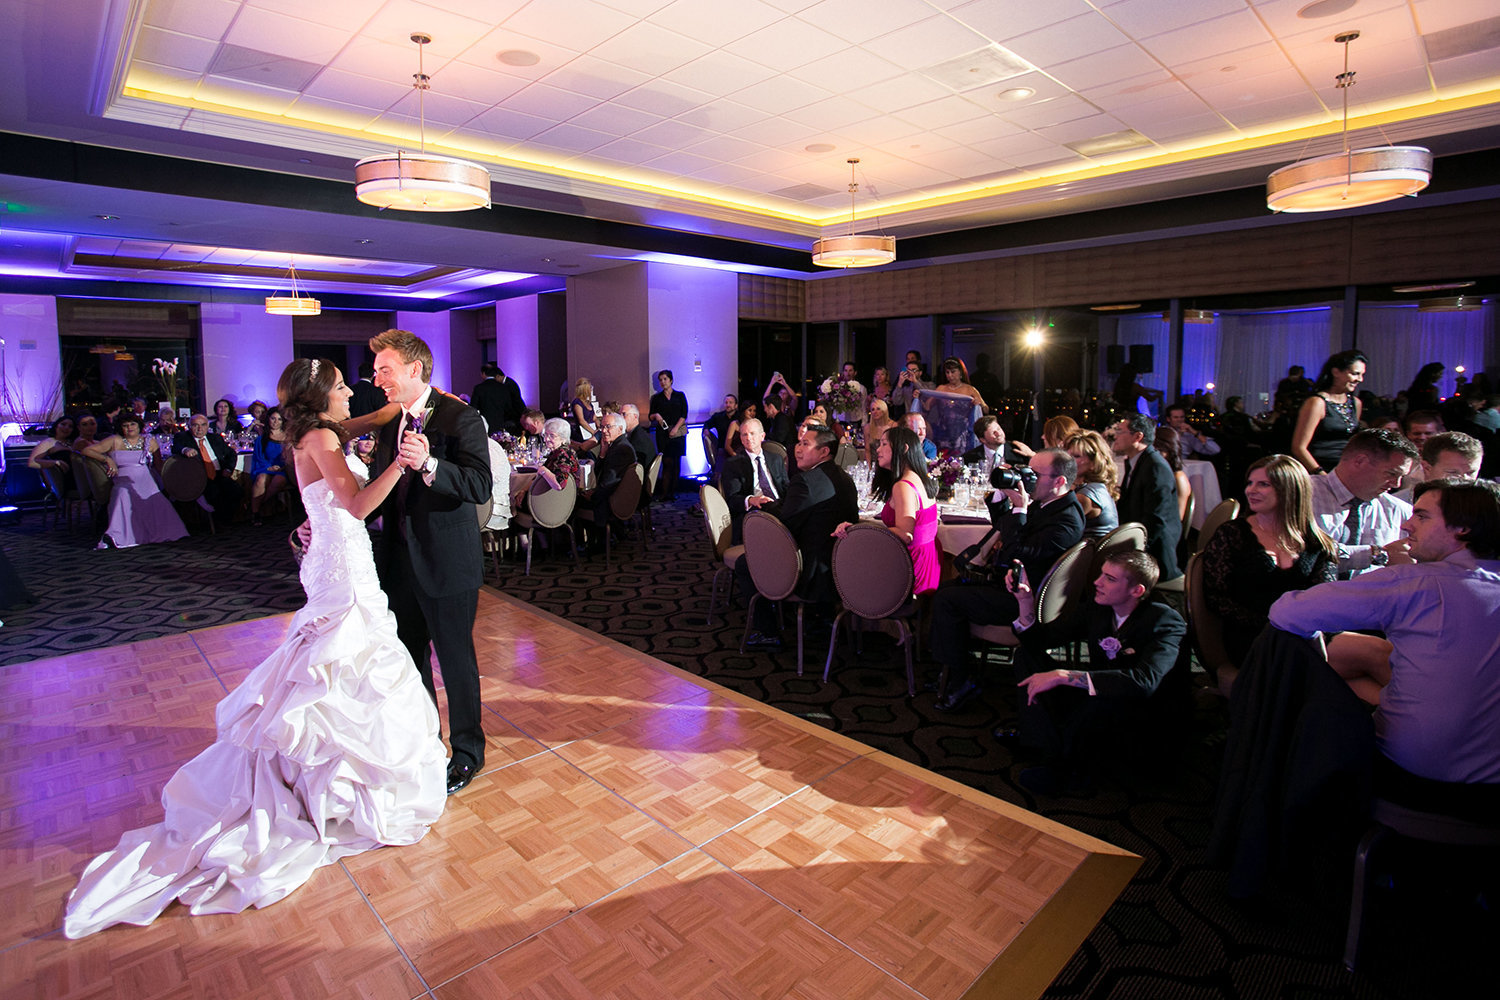 The first dance as a large crowd of wedding guests watch at the University Club on Symphony Tower | Reception Uplighting